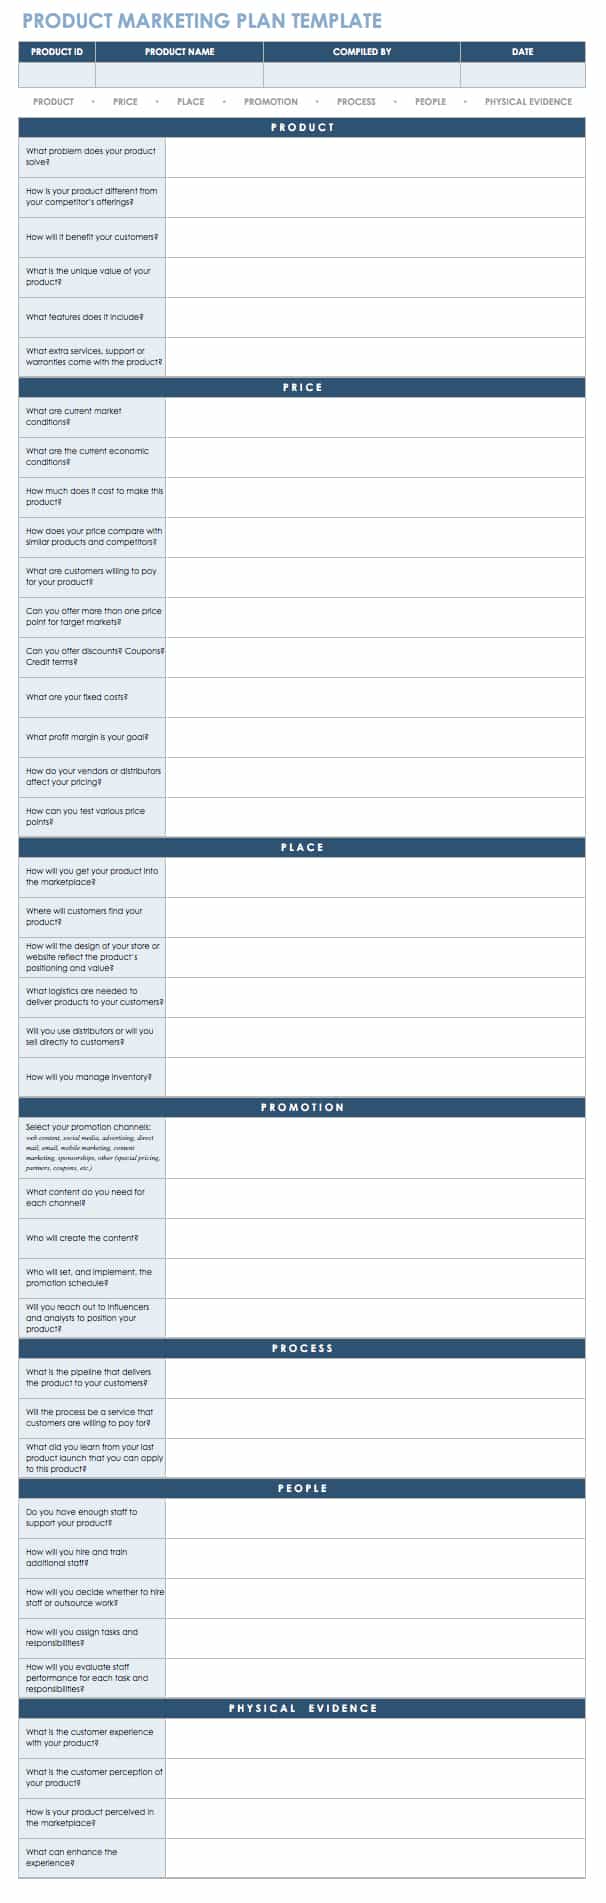 Product Marketing Plan Template